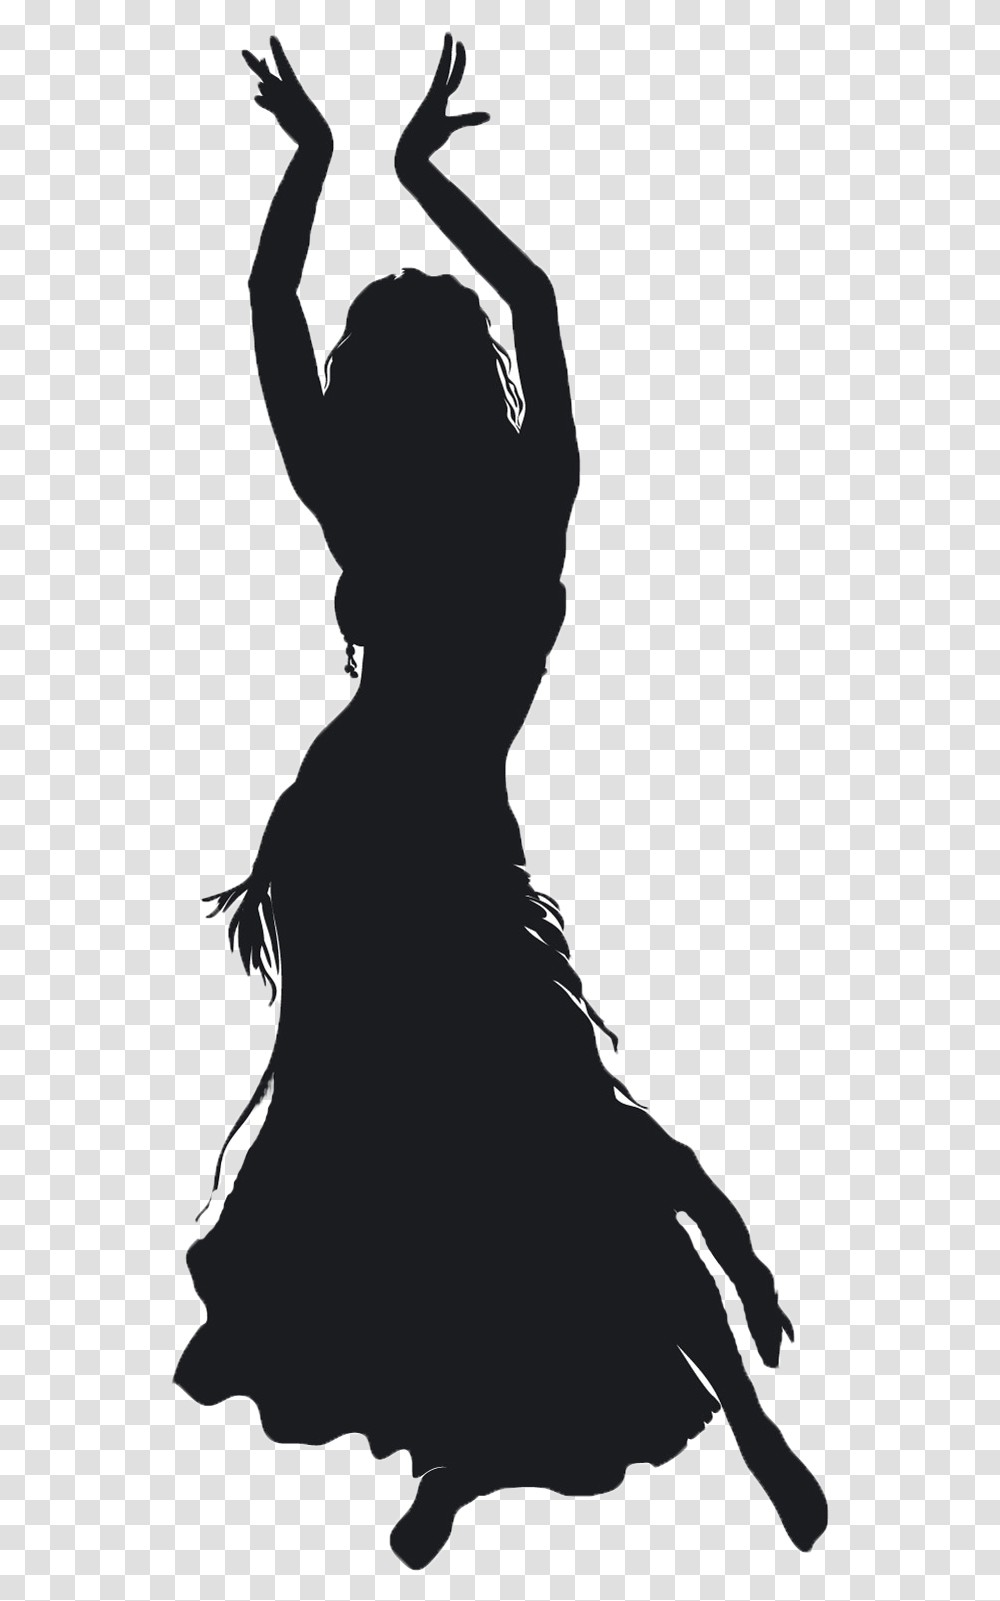 Belly Dance Silhouette Royalty Free, Person, Human, Dance Pose, Leisure Activities Transparent Png